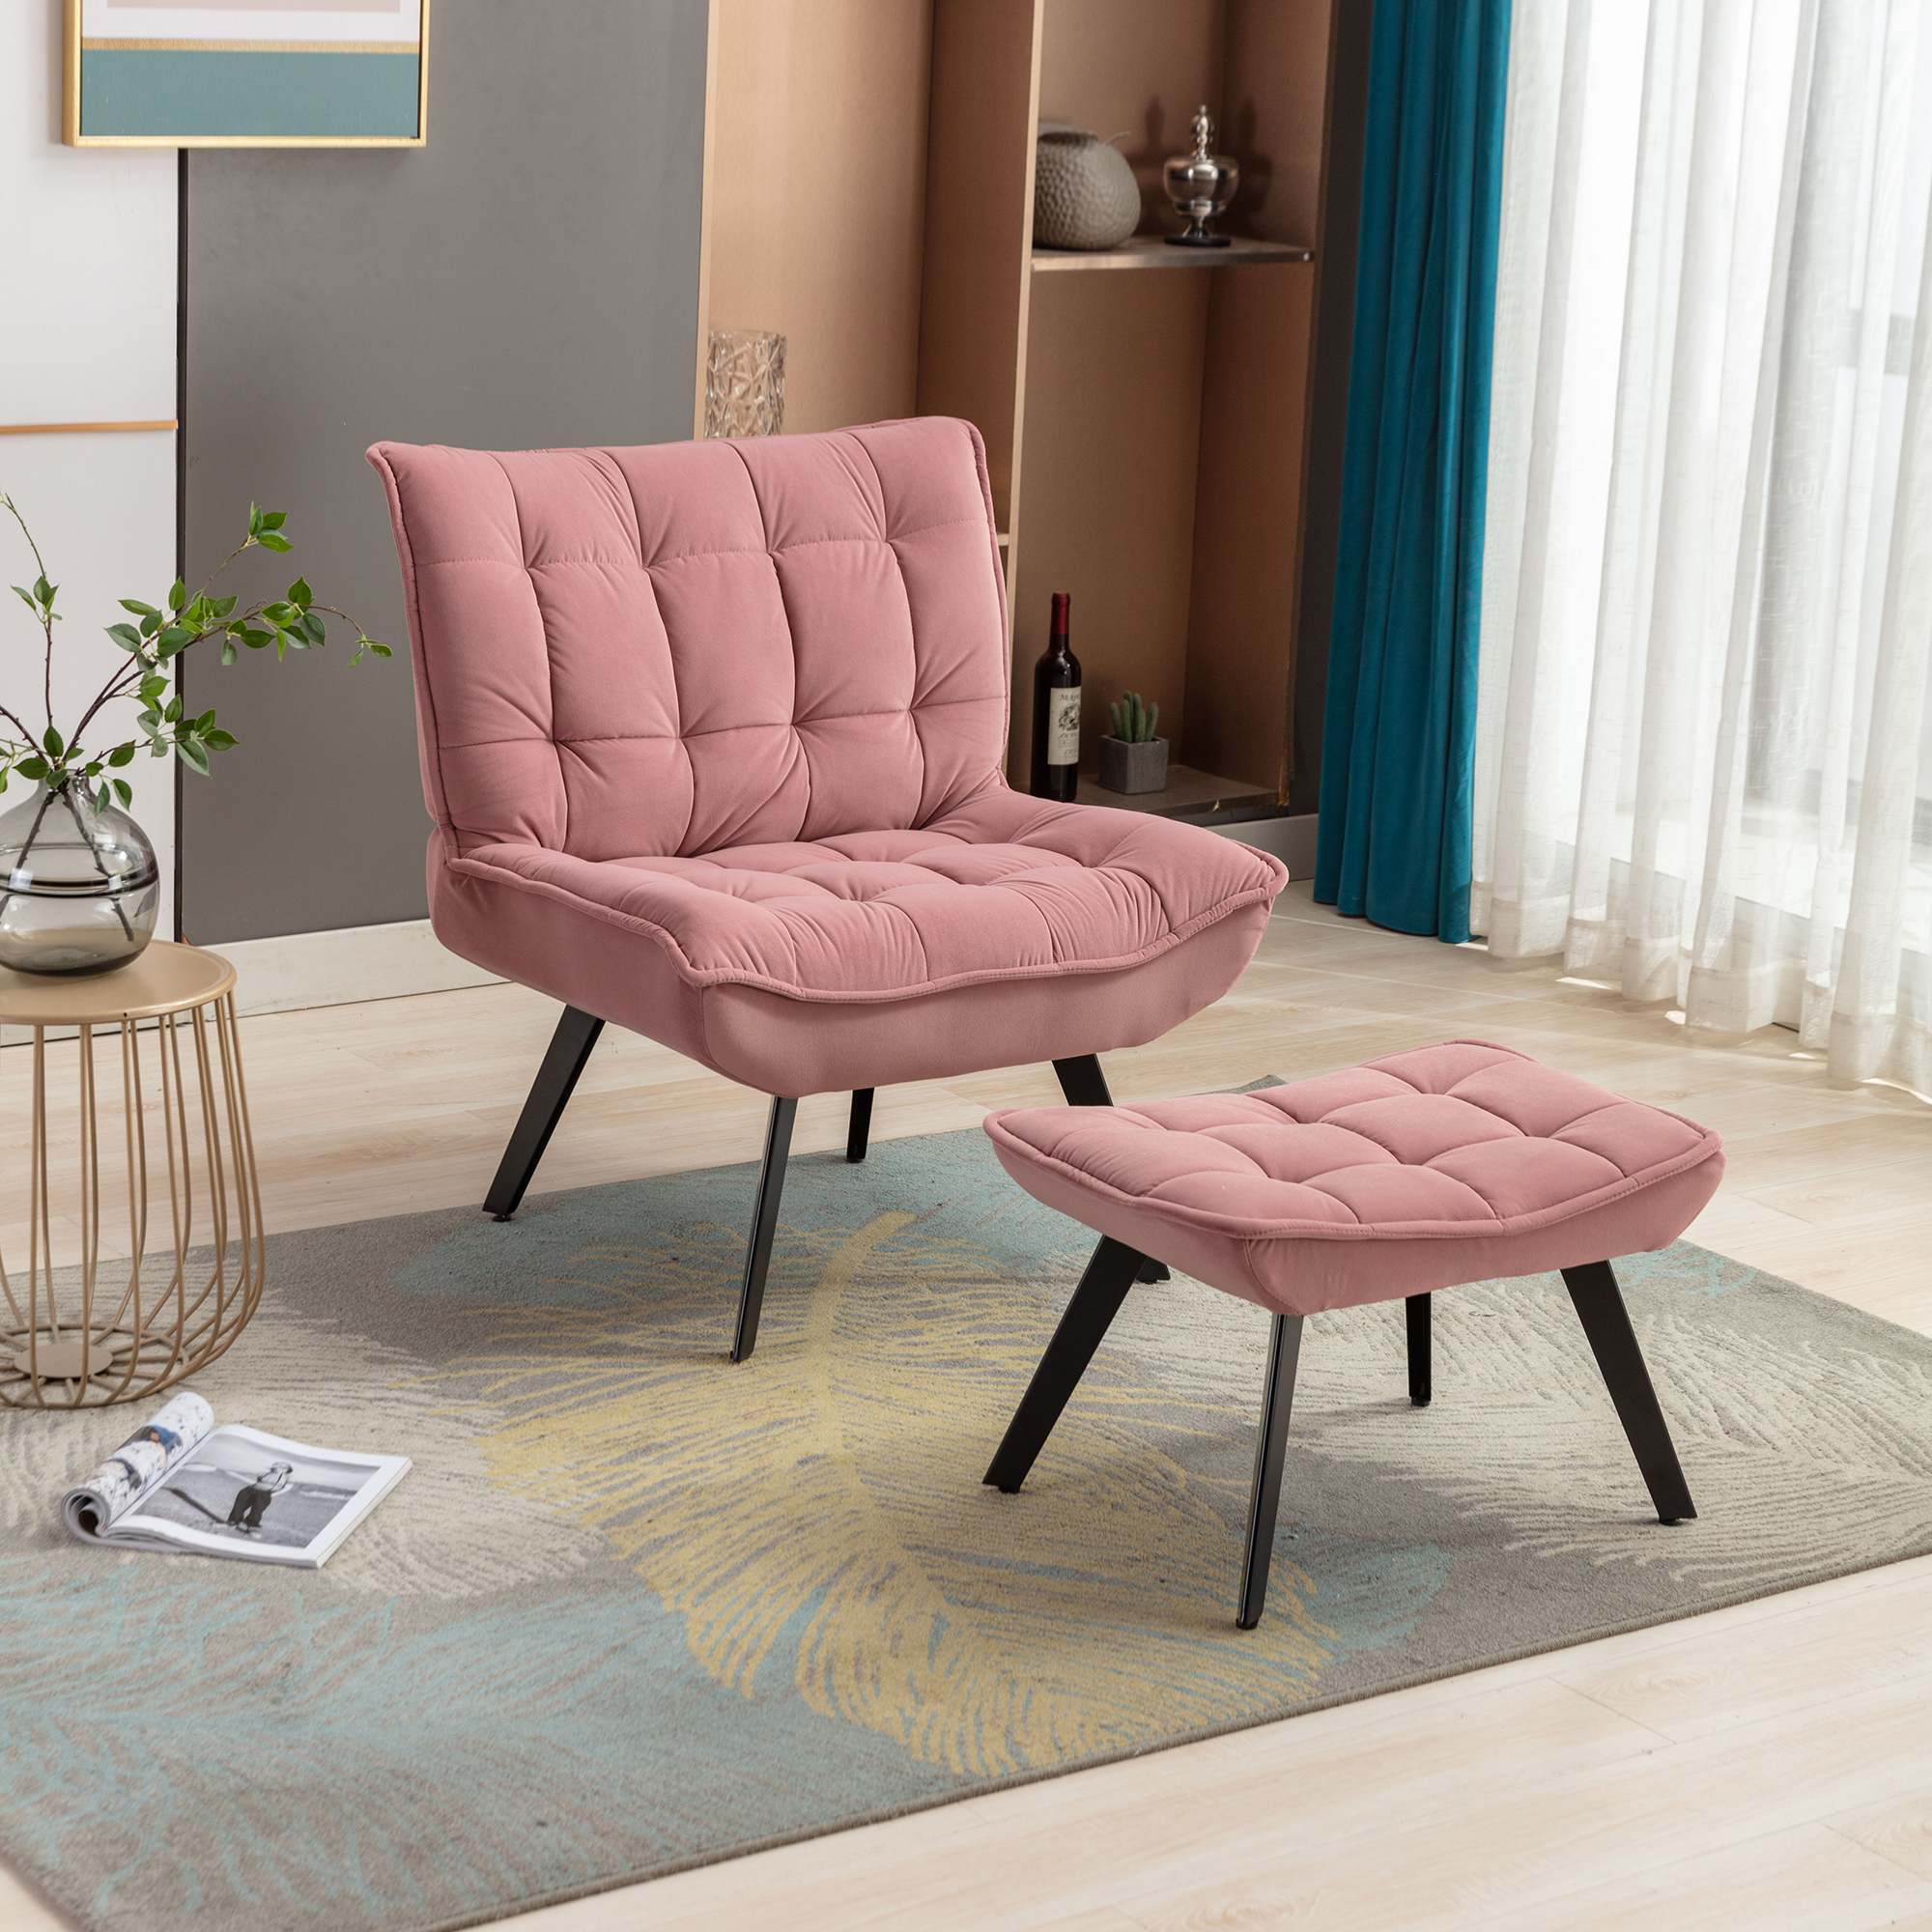 Modern Soft Velvet Fabric Material Large Width Accent Chair Leisure Chair Armchair TV Chair Bedroom Chair With Ottoman Black Legs For Indoor Home And Living Room,Pink-CASAINC